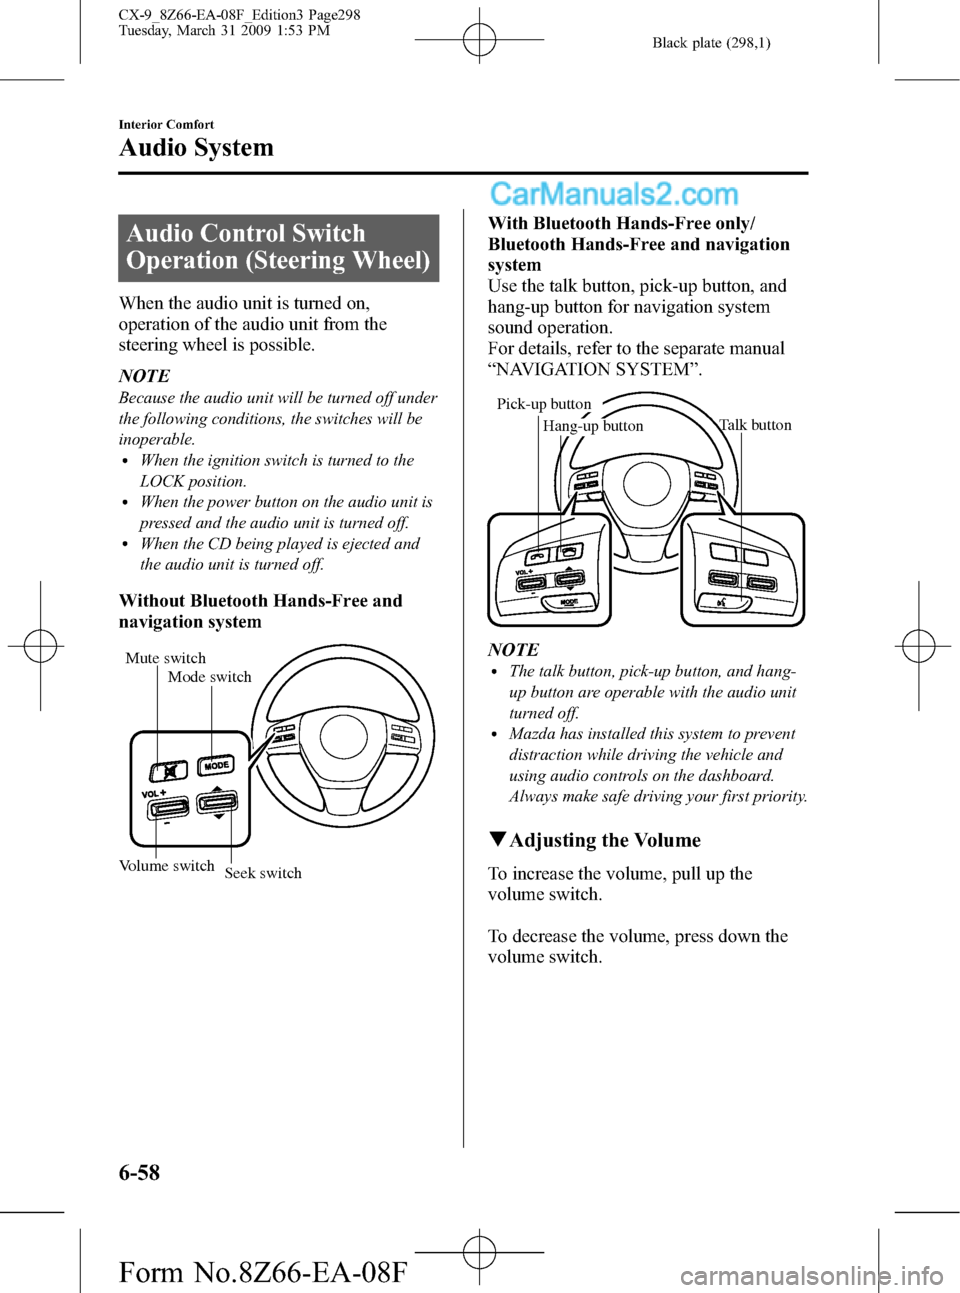 MAZDA MODEL CX-9 2009  Owners Manual (in English) Black plate (298,1)
Audio Control Switch
Operation (Steering Wheel)
When the audio unit is turned on,
operation of the audio unit from the
steering wheel is possible.
NOTE
Because the audio unit will 